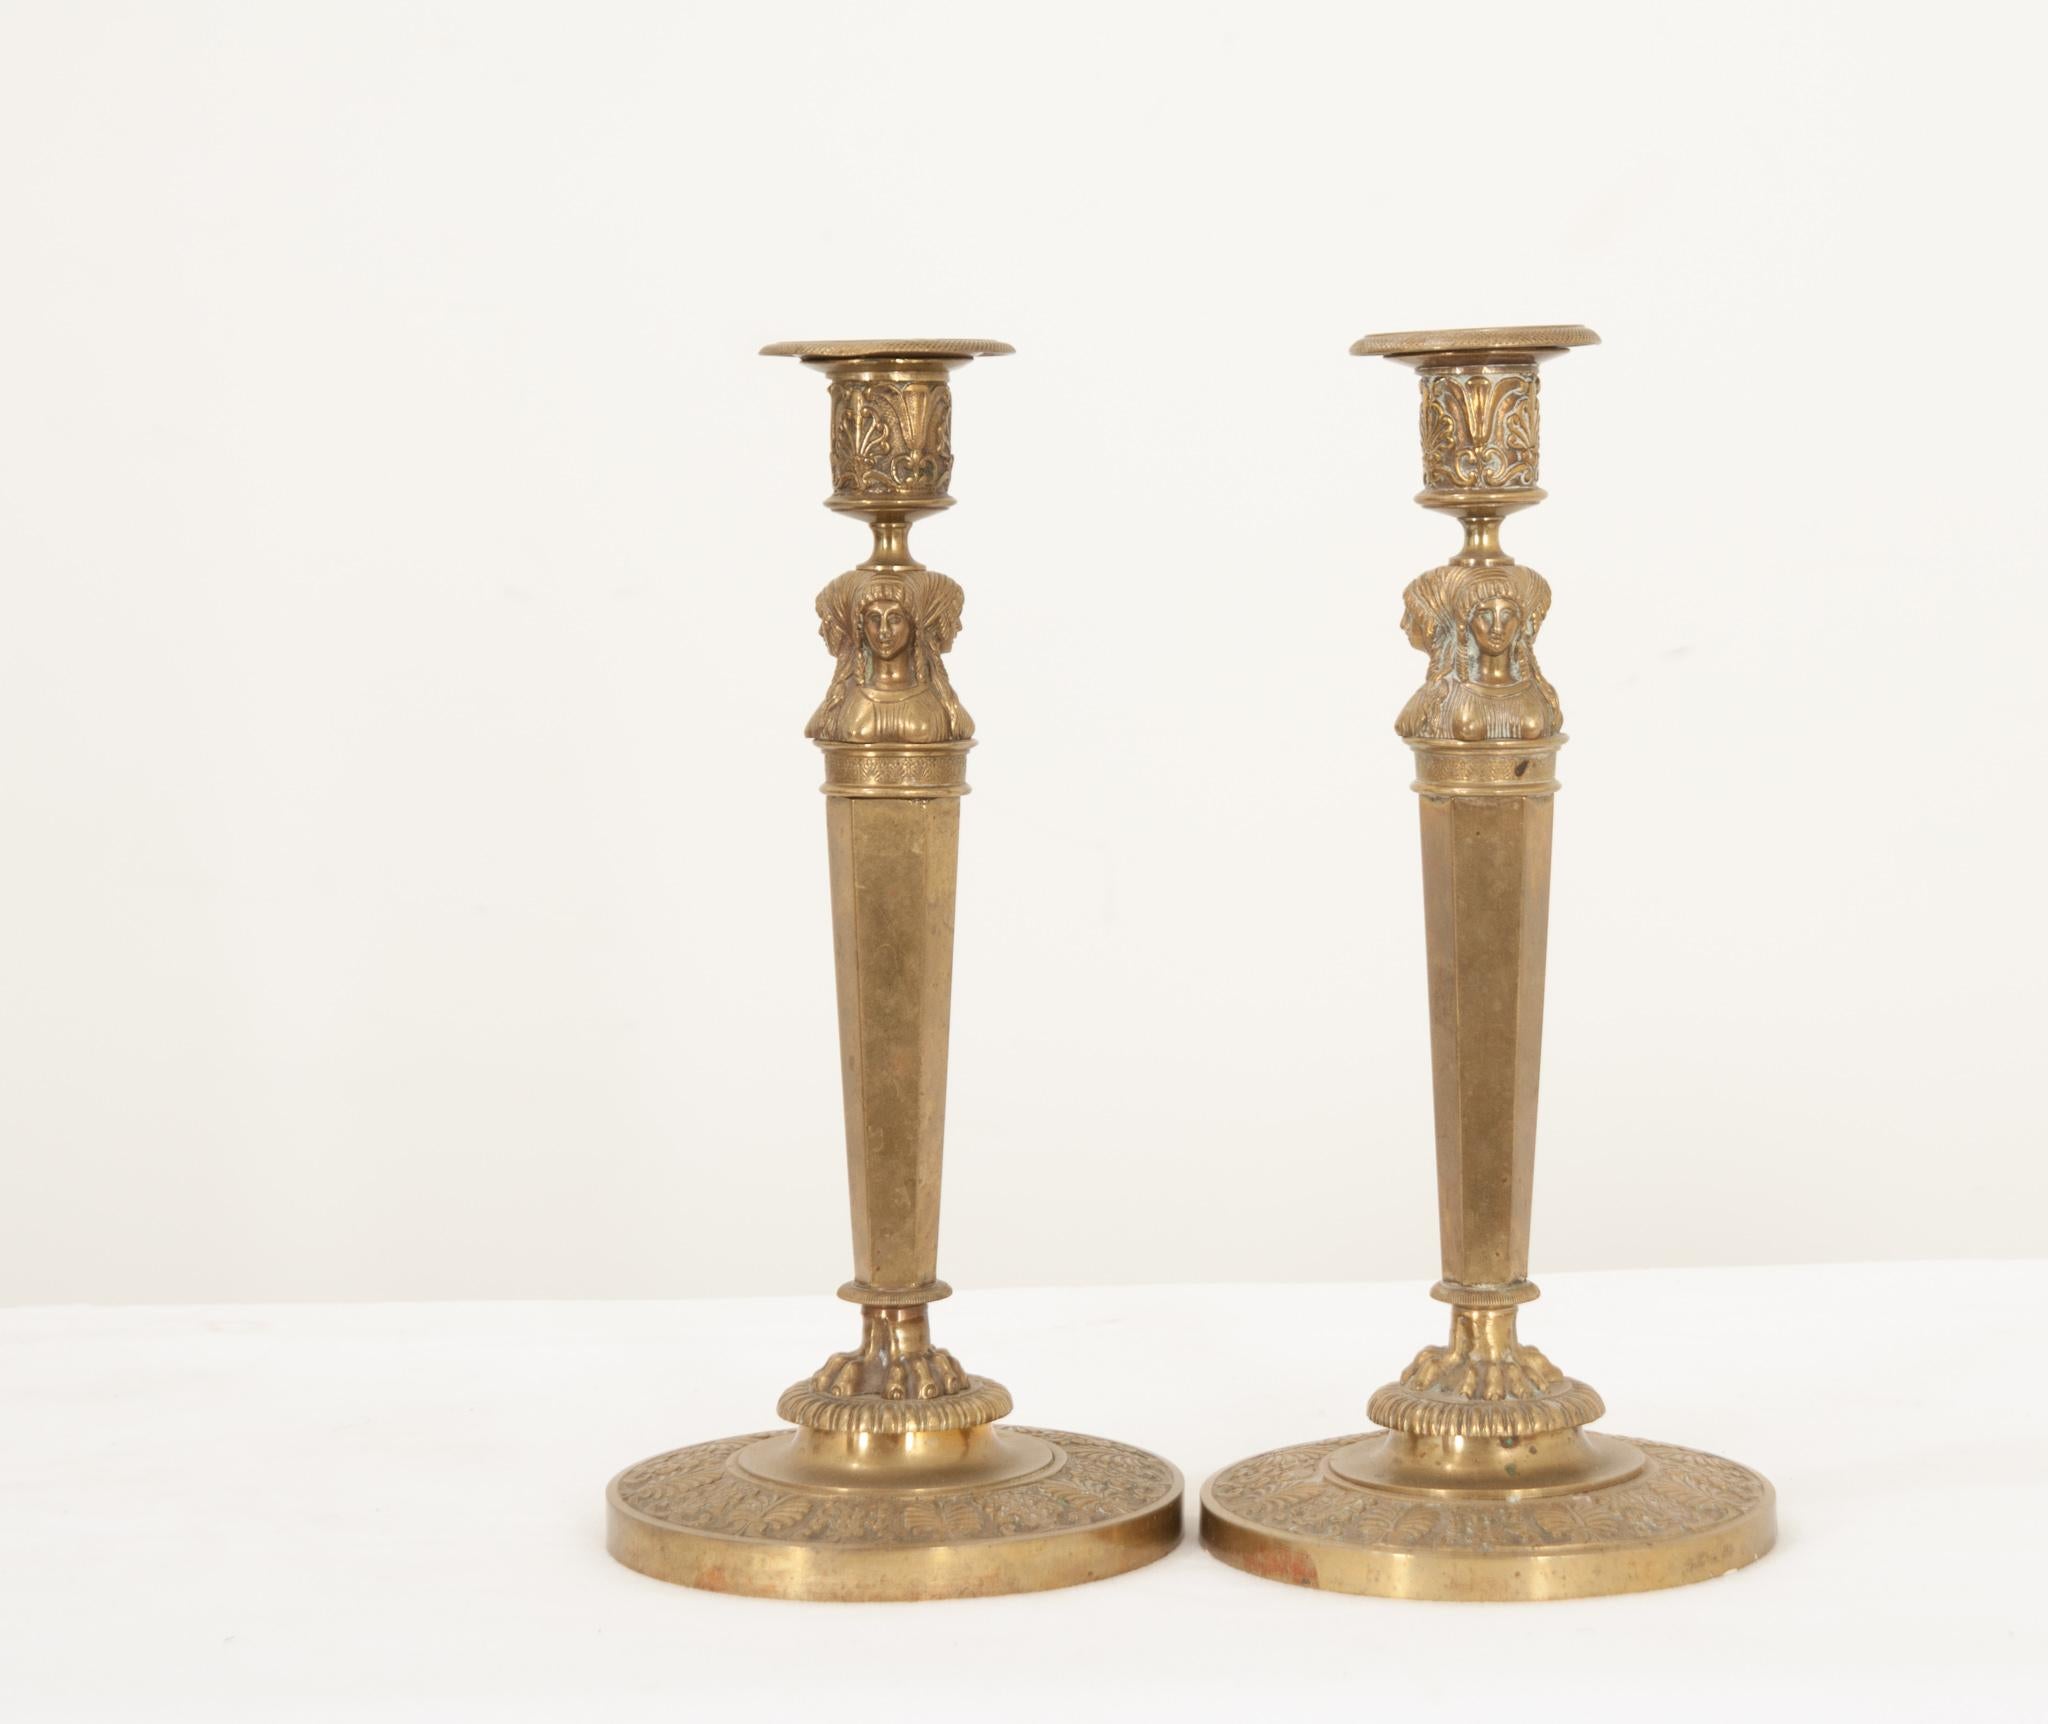 This pair of brass candlesticks are a wonderful find! Crafted in the distinctive style of Claude Galle during the 1st empire period in France, circa 1810. Three female busts dressed in a Hellenistic style beautifully adorn the stem of the flambeaux